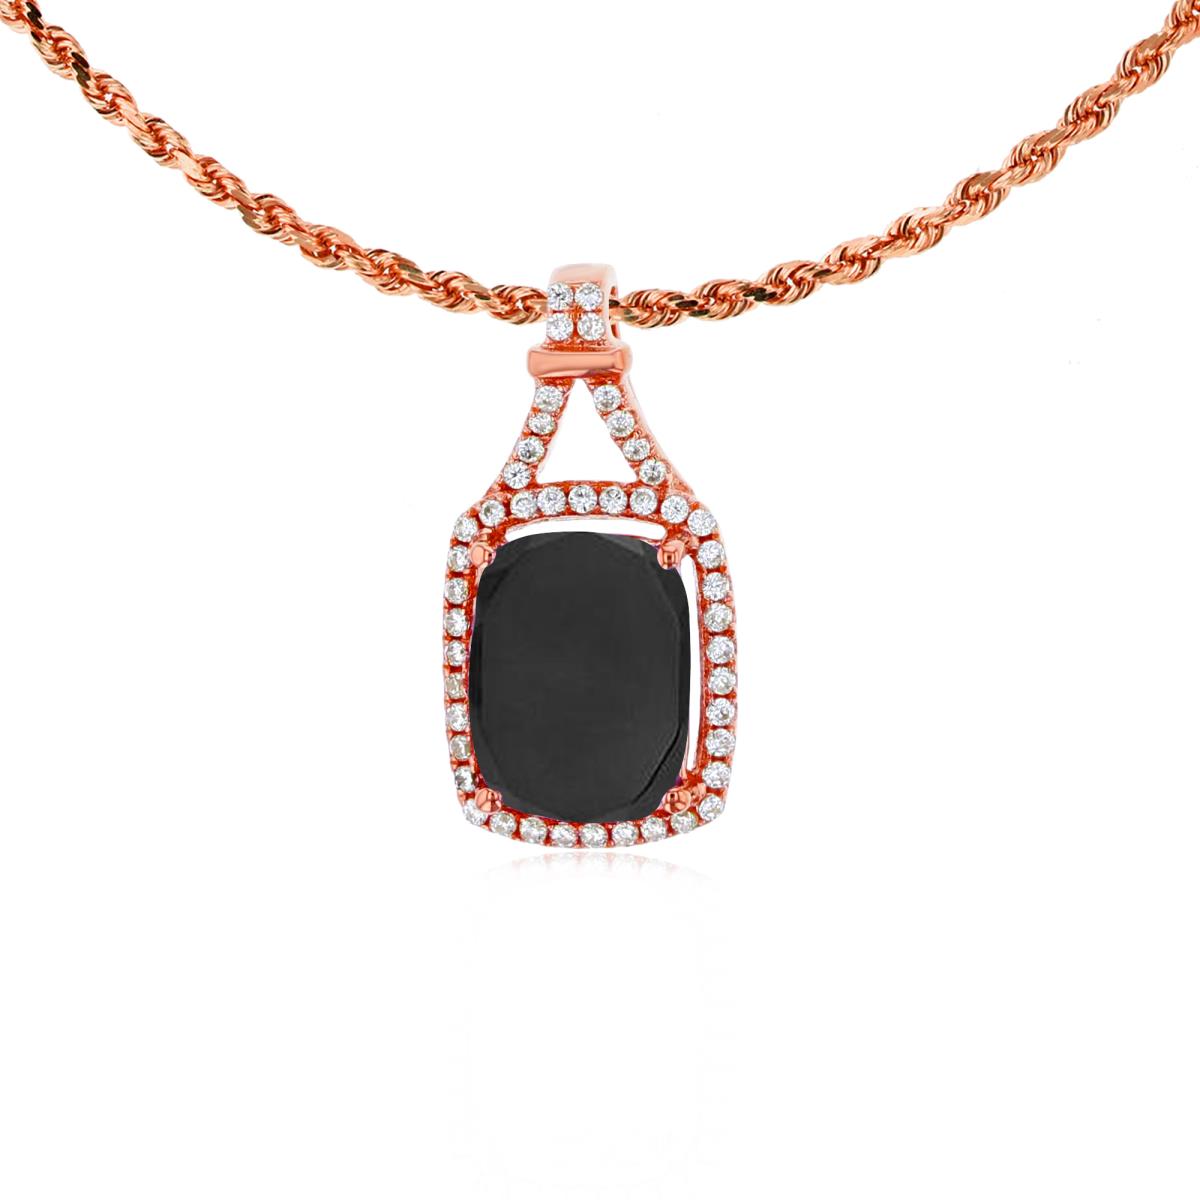 10K Rose Gold 8x6mm Cushion Onyx & 0.13 CTTW Rd Diamonds Halo 18" Rope Chain Necklace